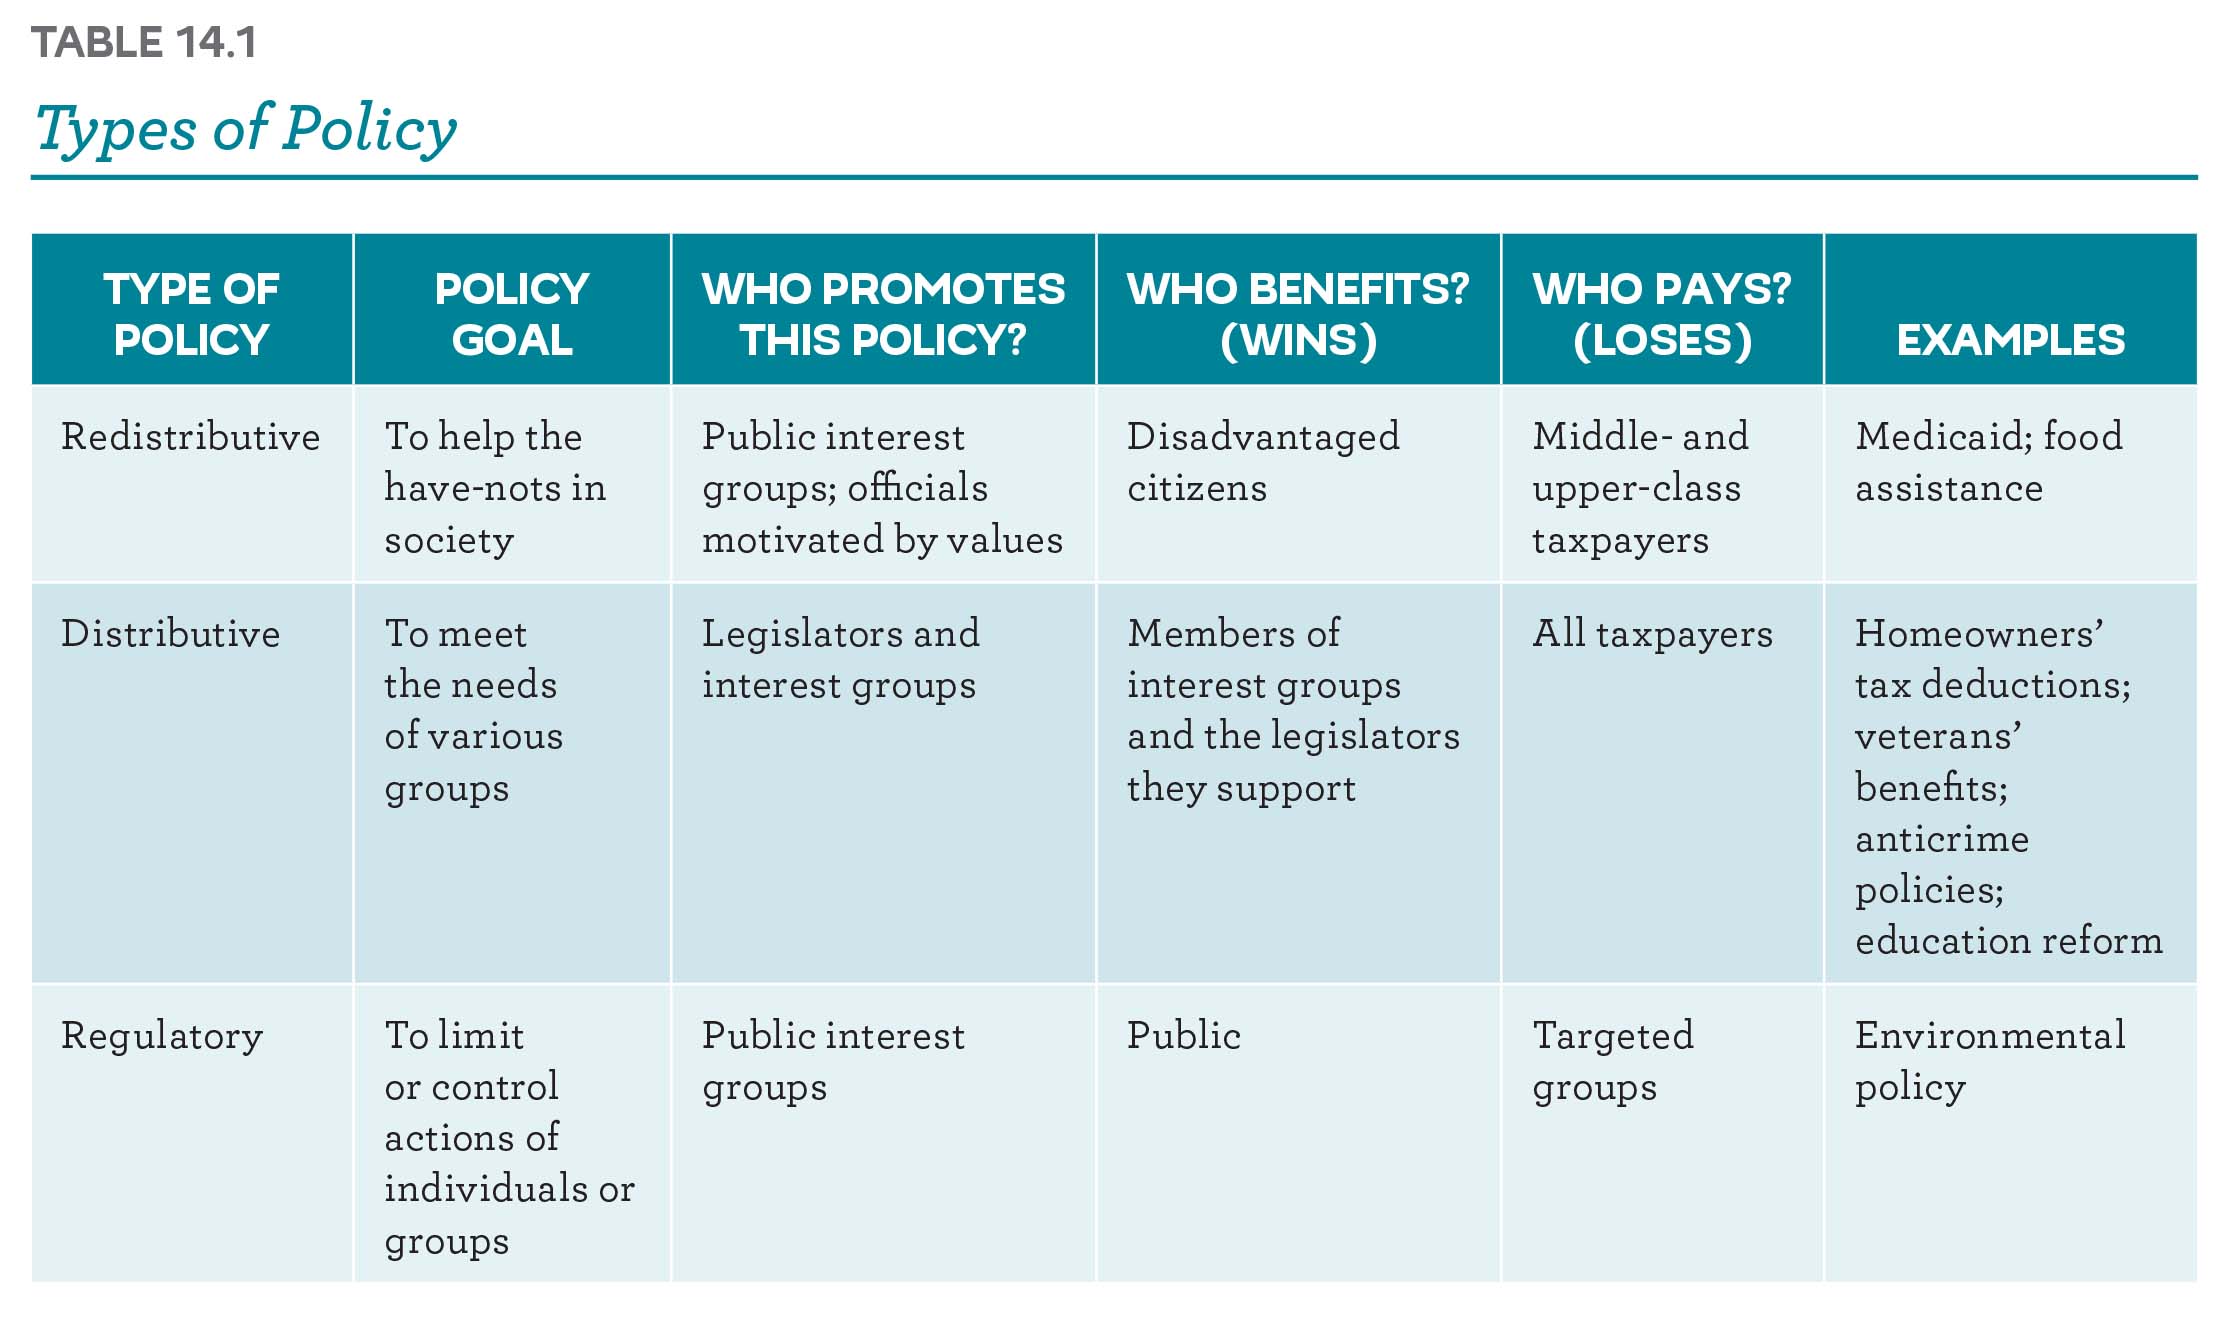 Types of policy